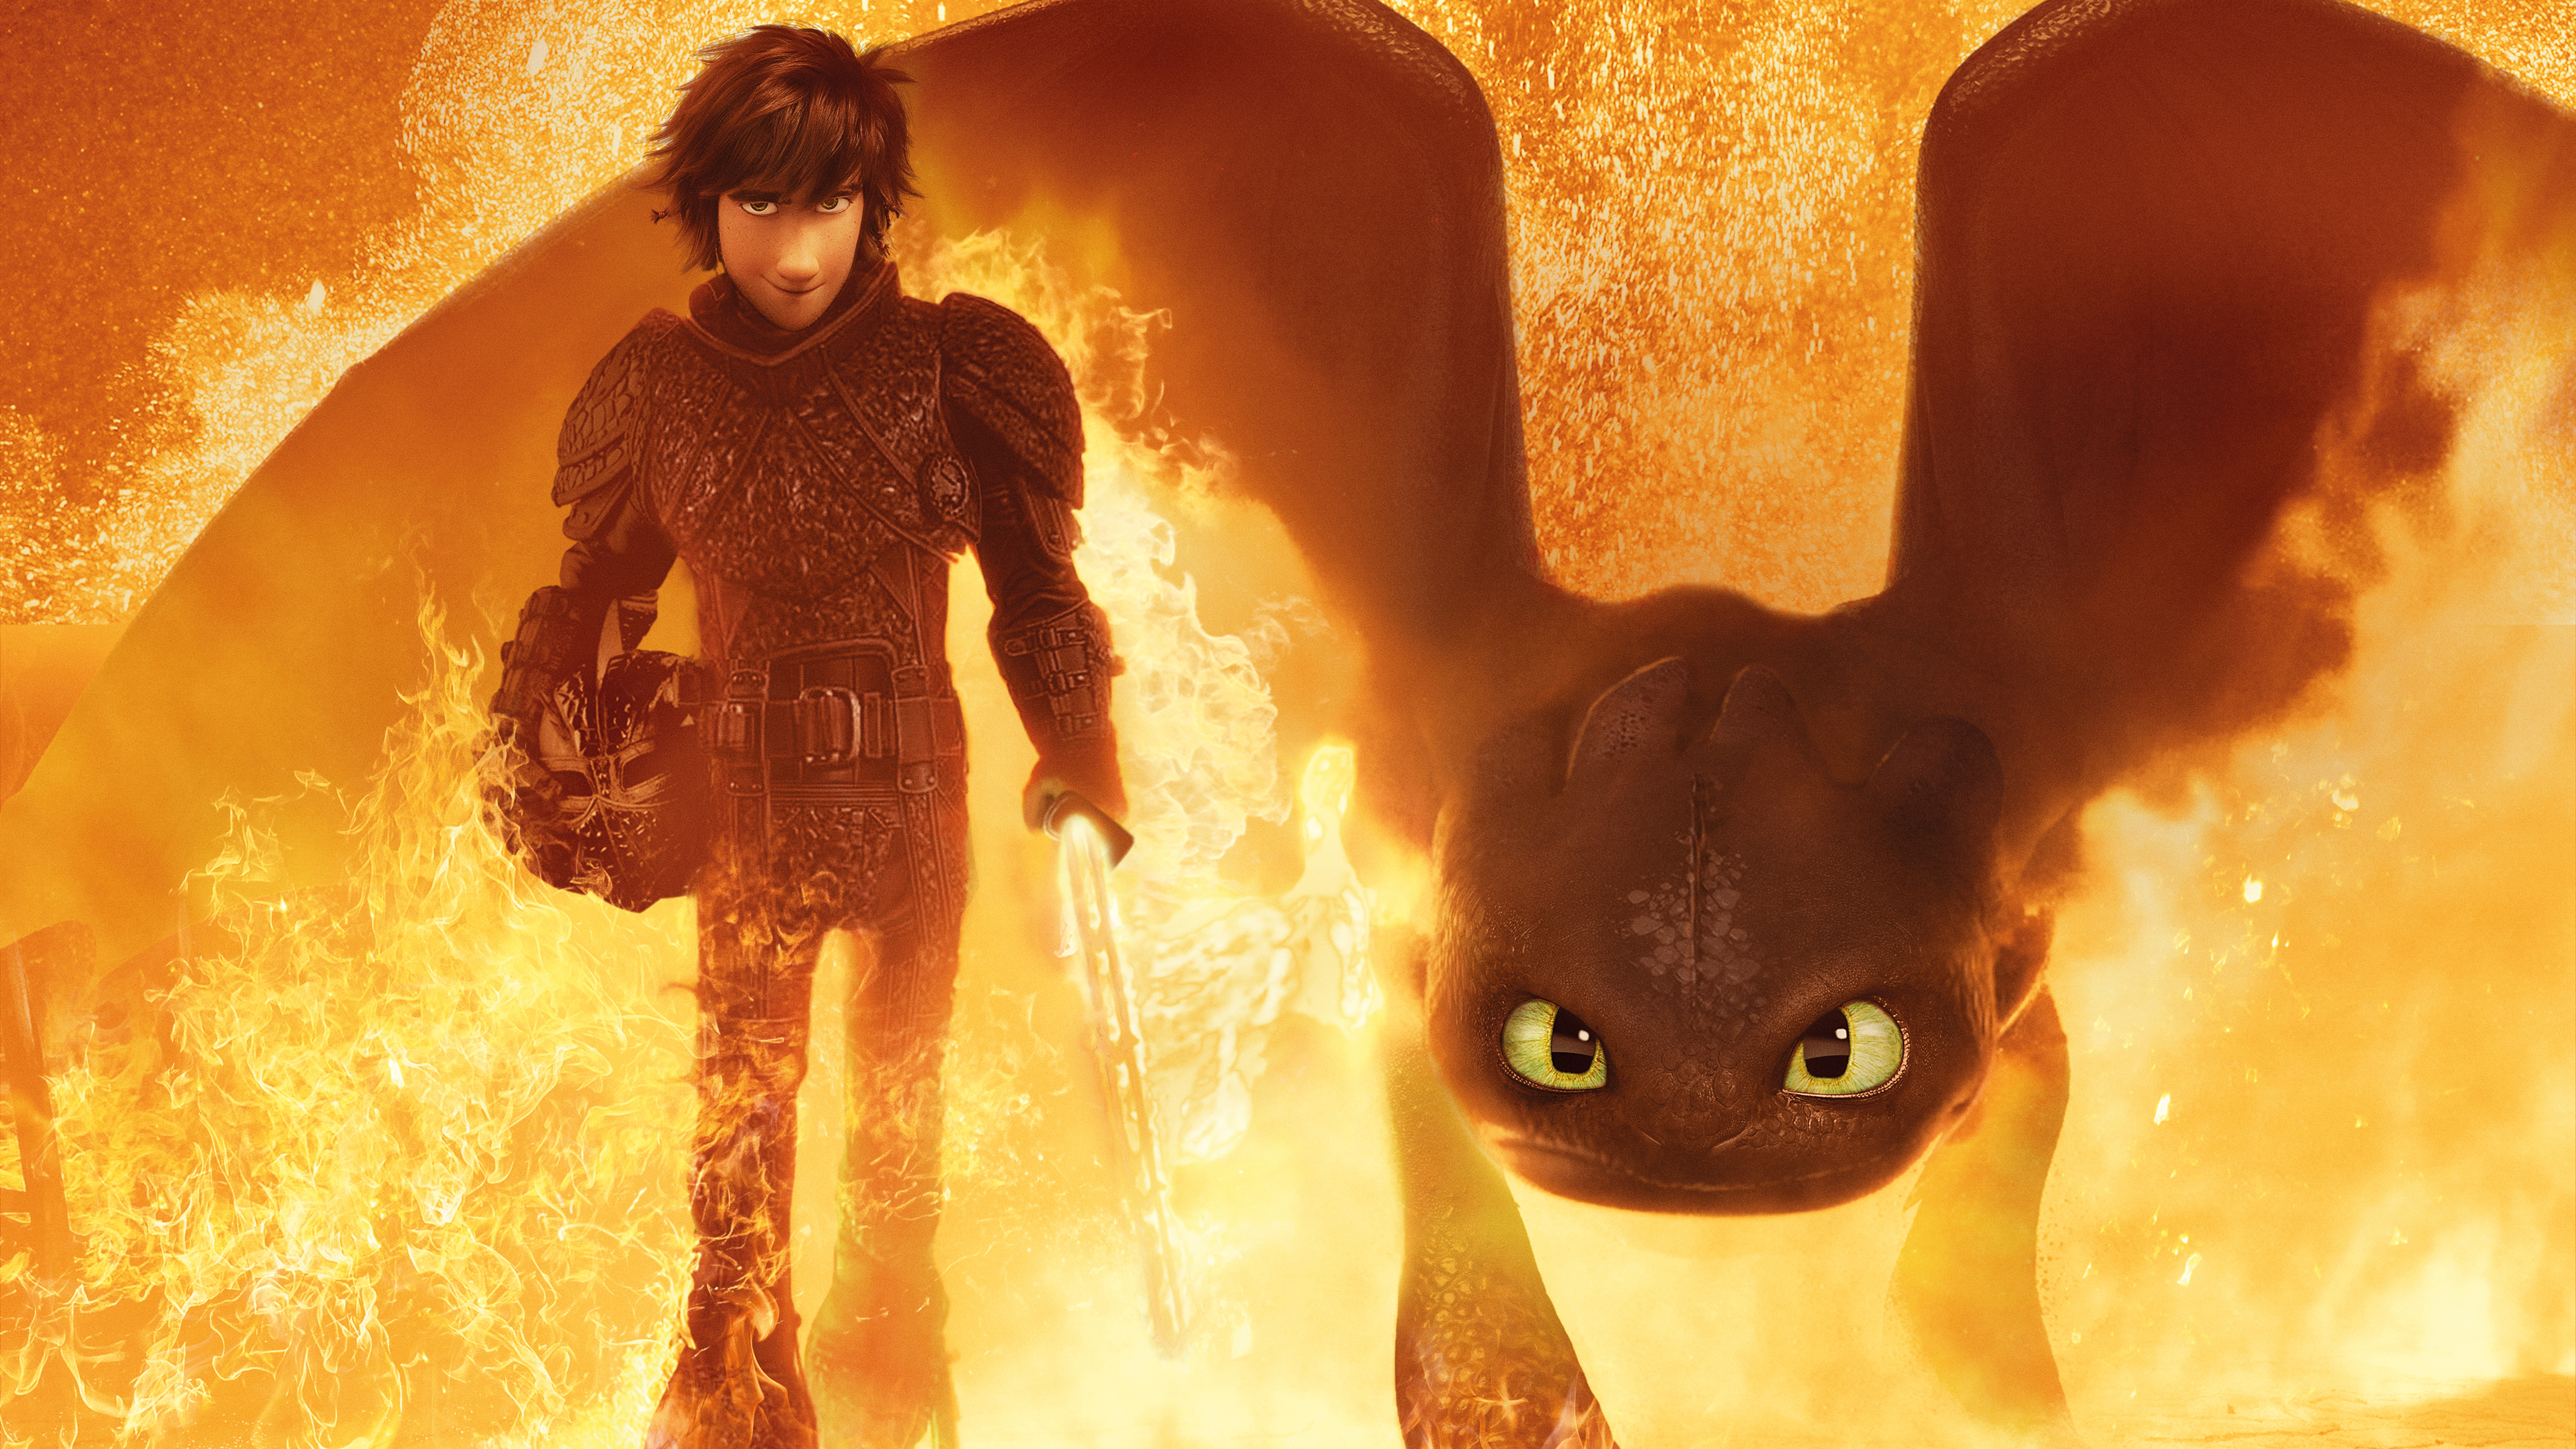 5120x2880 Hiccup (How to Train Your Dragon), Toothless (How to Train Your Dragon) wallpaper HD Wallpaper